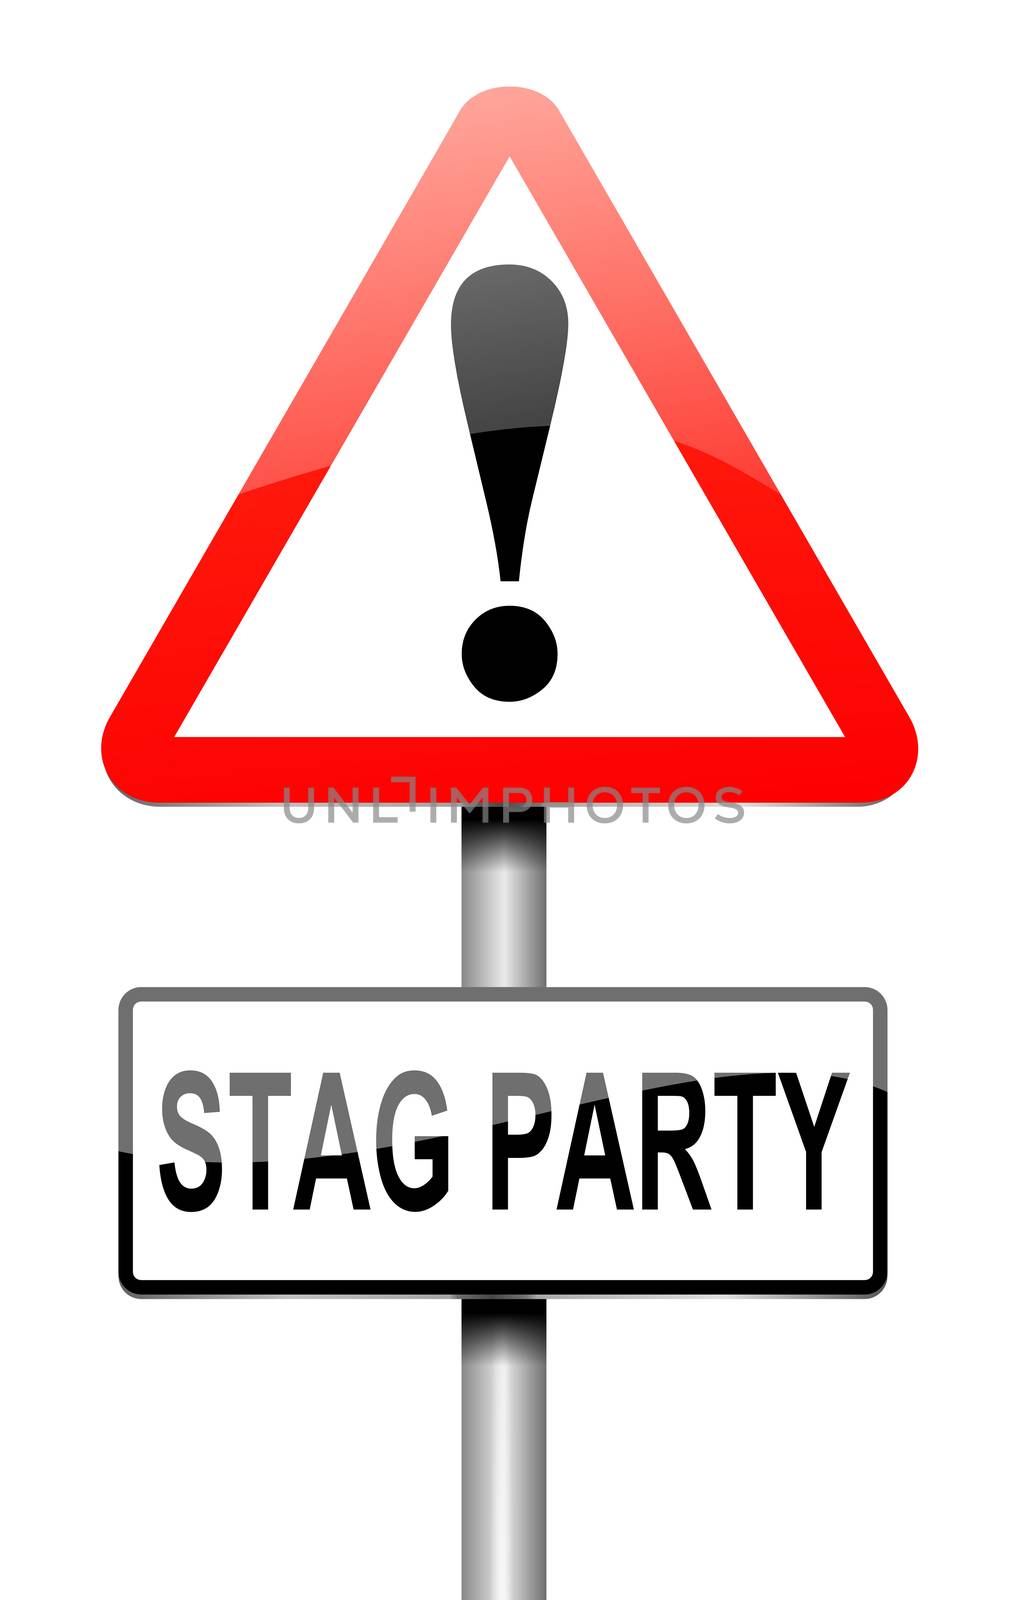 Illustration depicting a sign with a stag party concept.